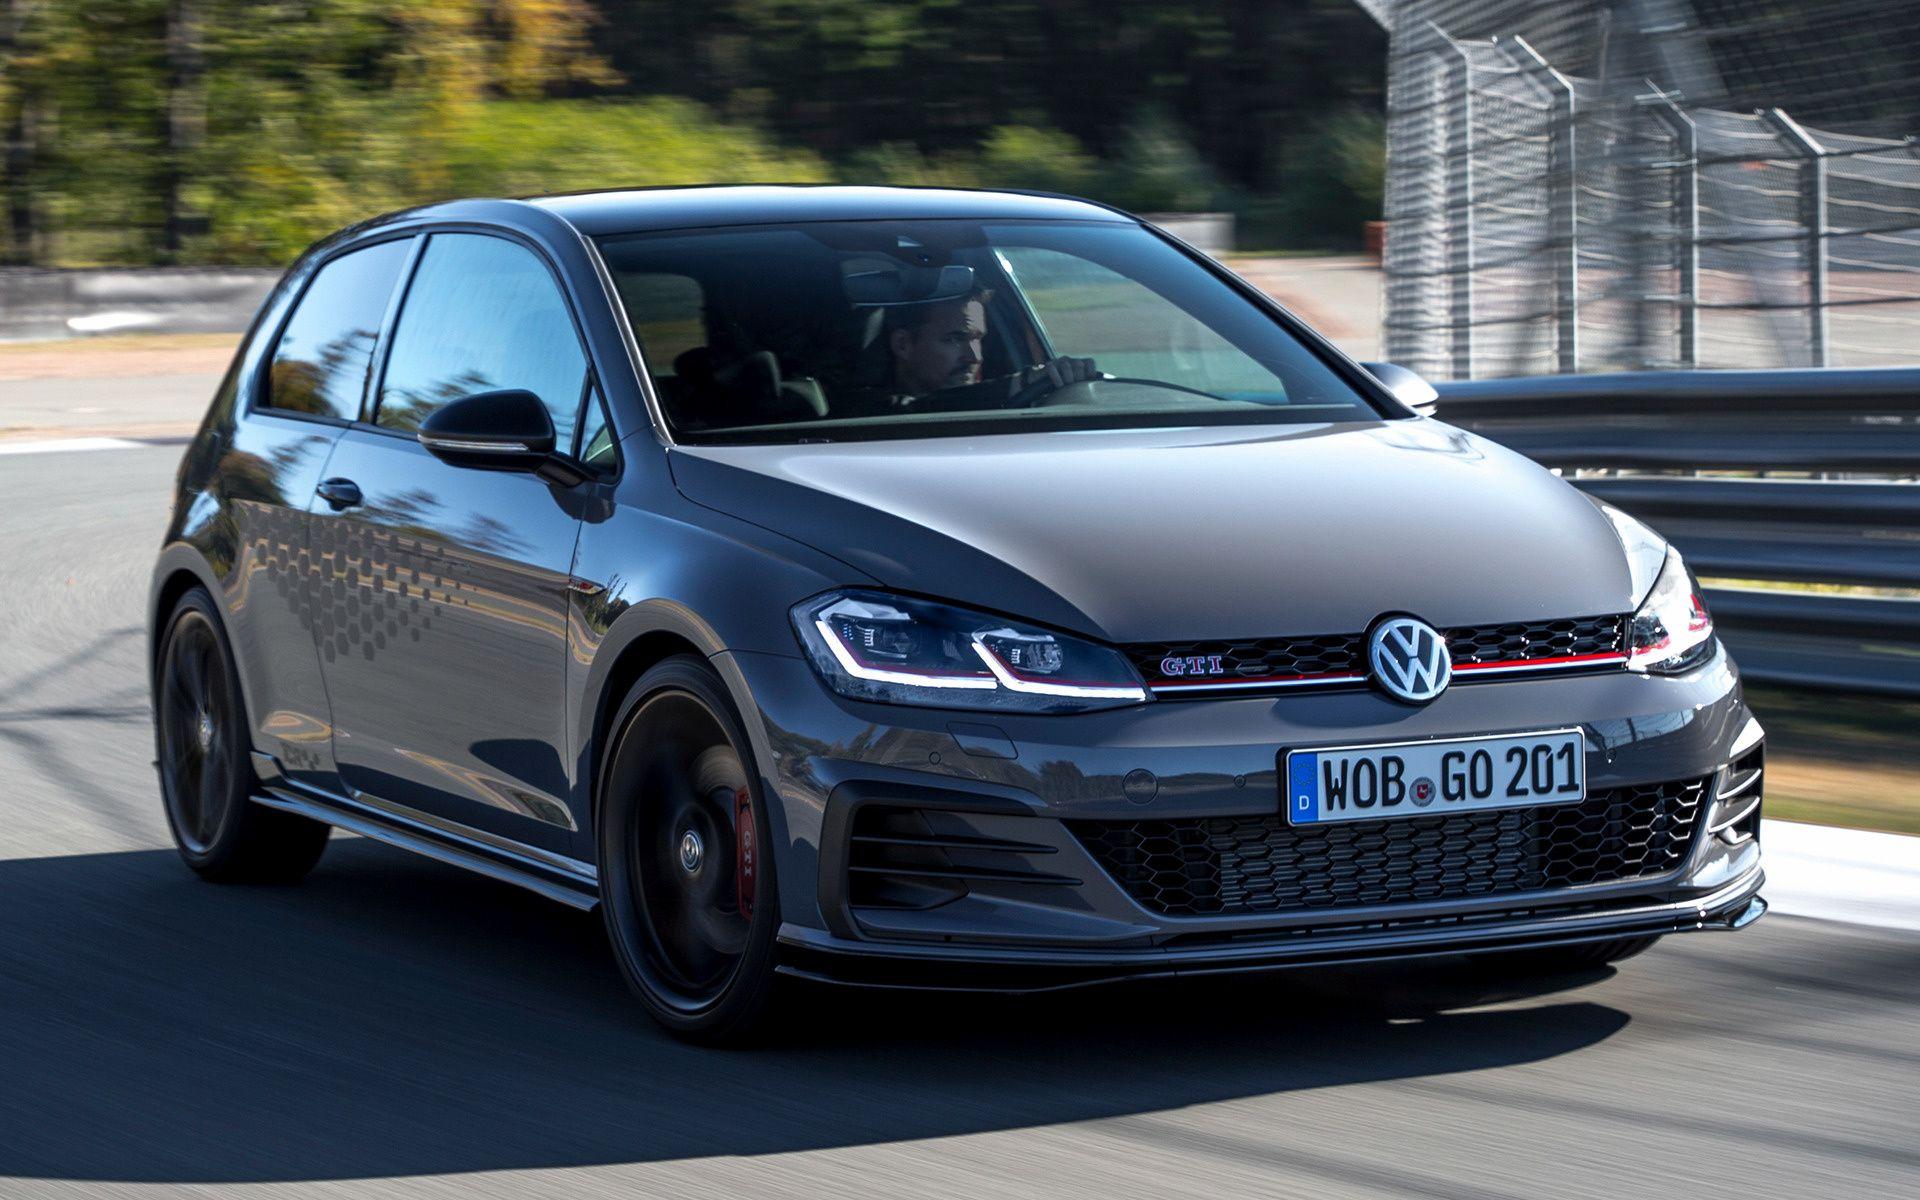 Golf Gti Wallpapers - Top Free Golf Gti Backgrounds - WallpaperAccess